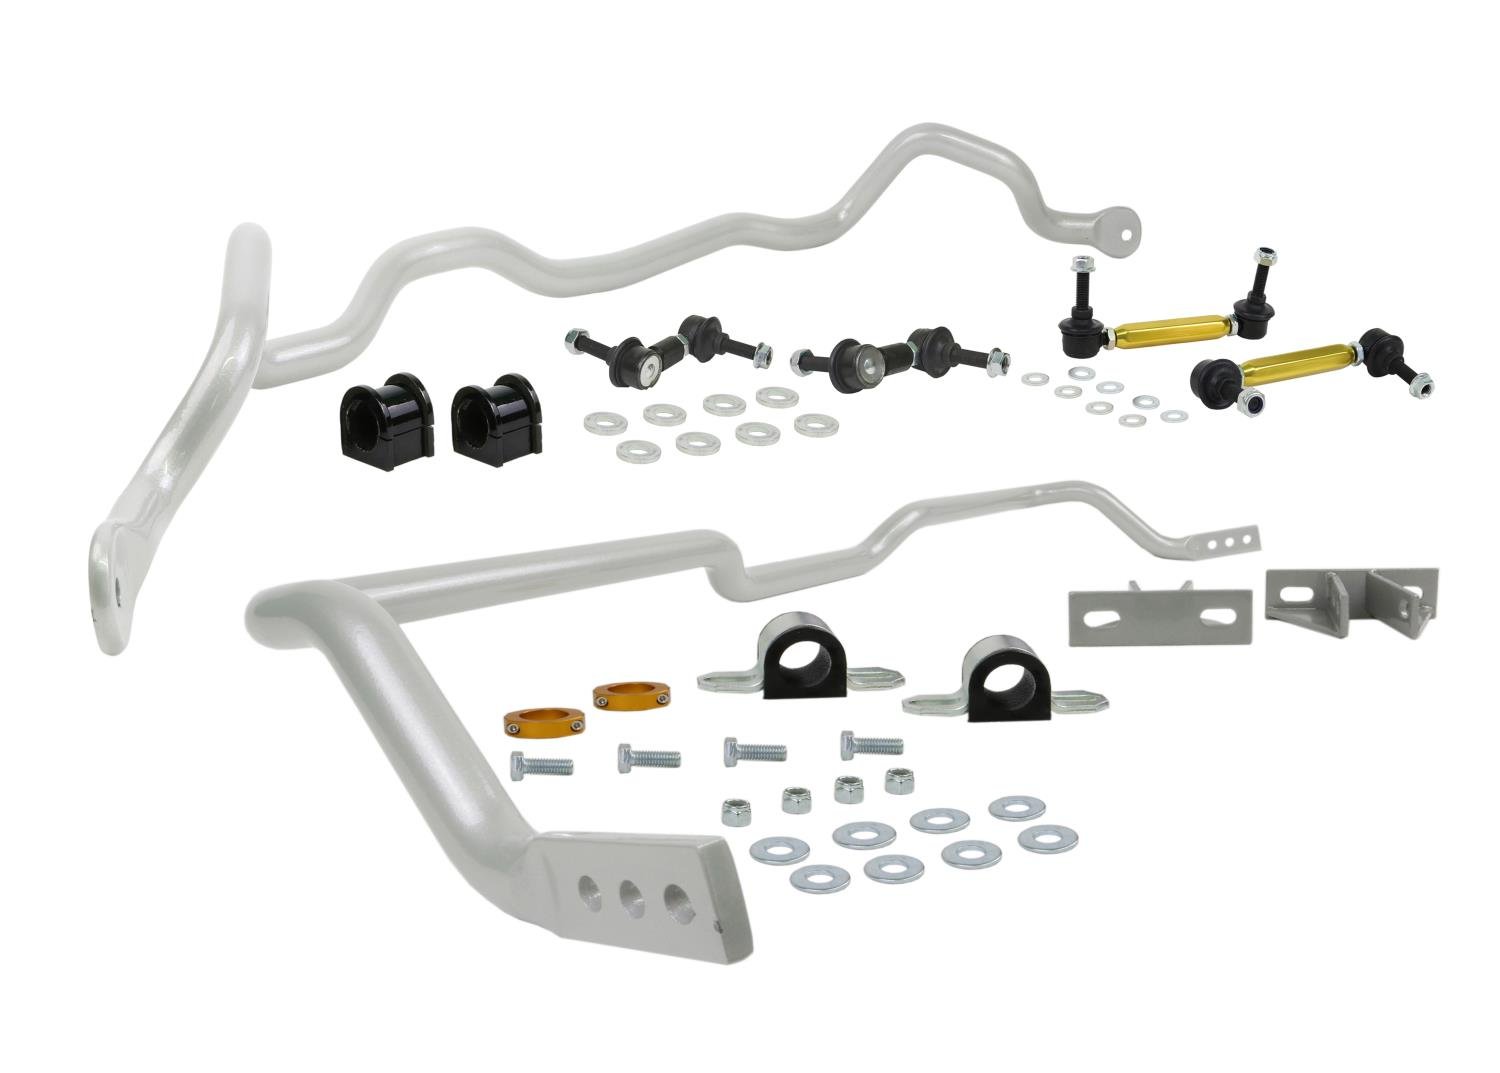 BMK009M Front and Rear Sway Bar Kit w/26 mm Rear for 2003-2006 Mitsubishi Lancer Evo, 2005-2006 Evo MR, RS